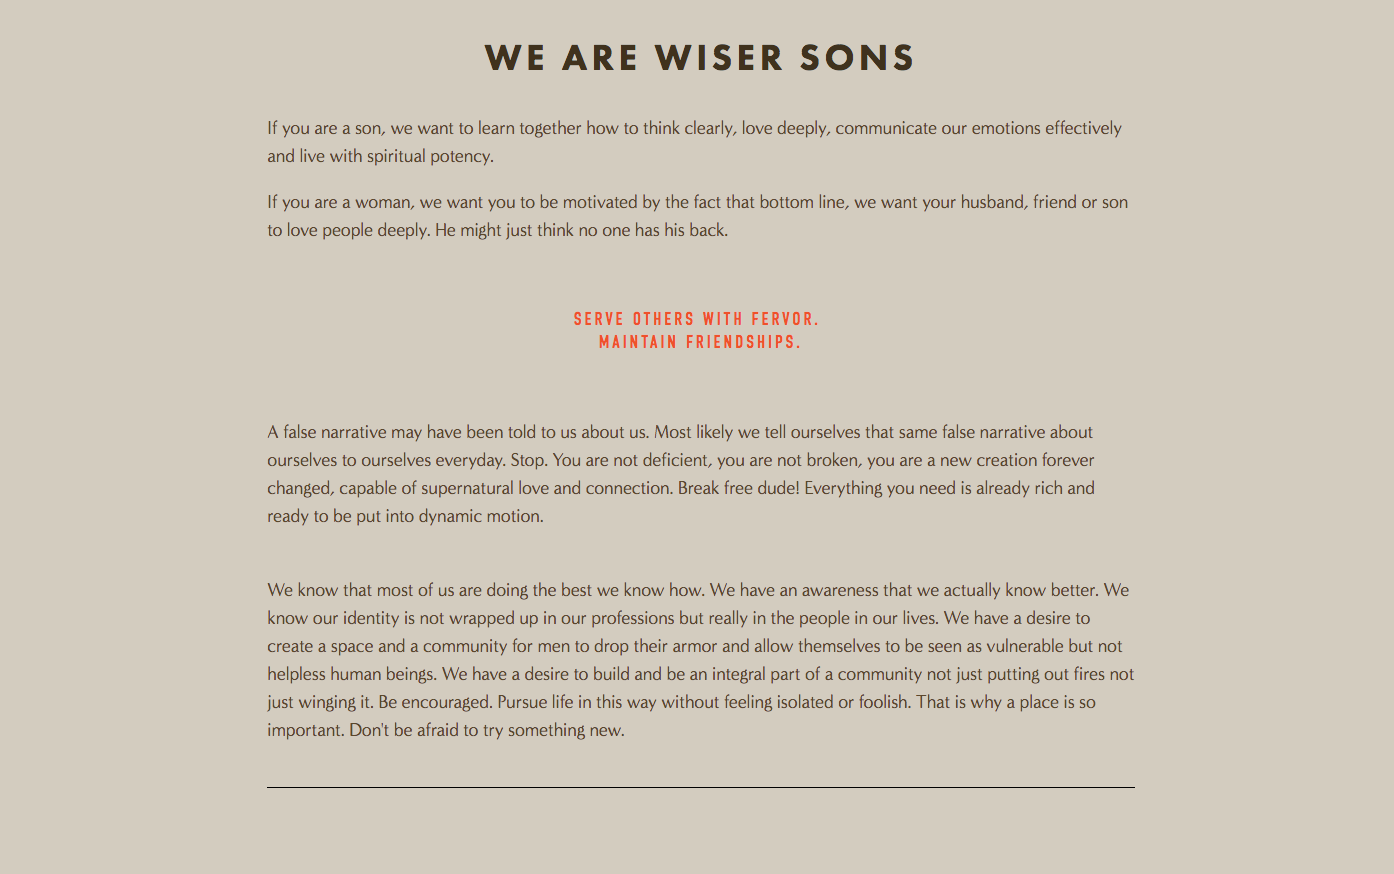 Wiser Sons Name Brand and Copy 4.png